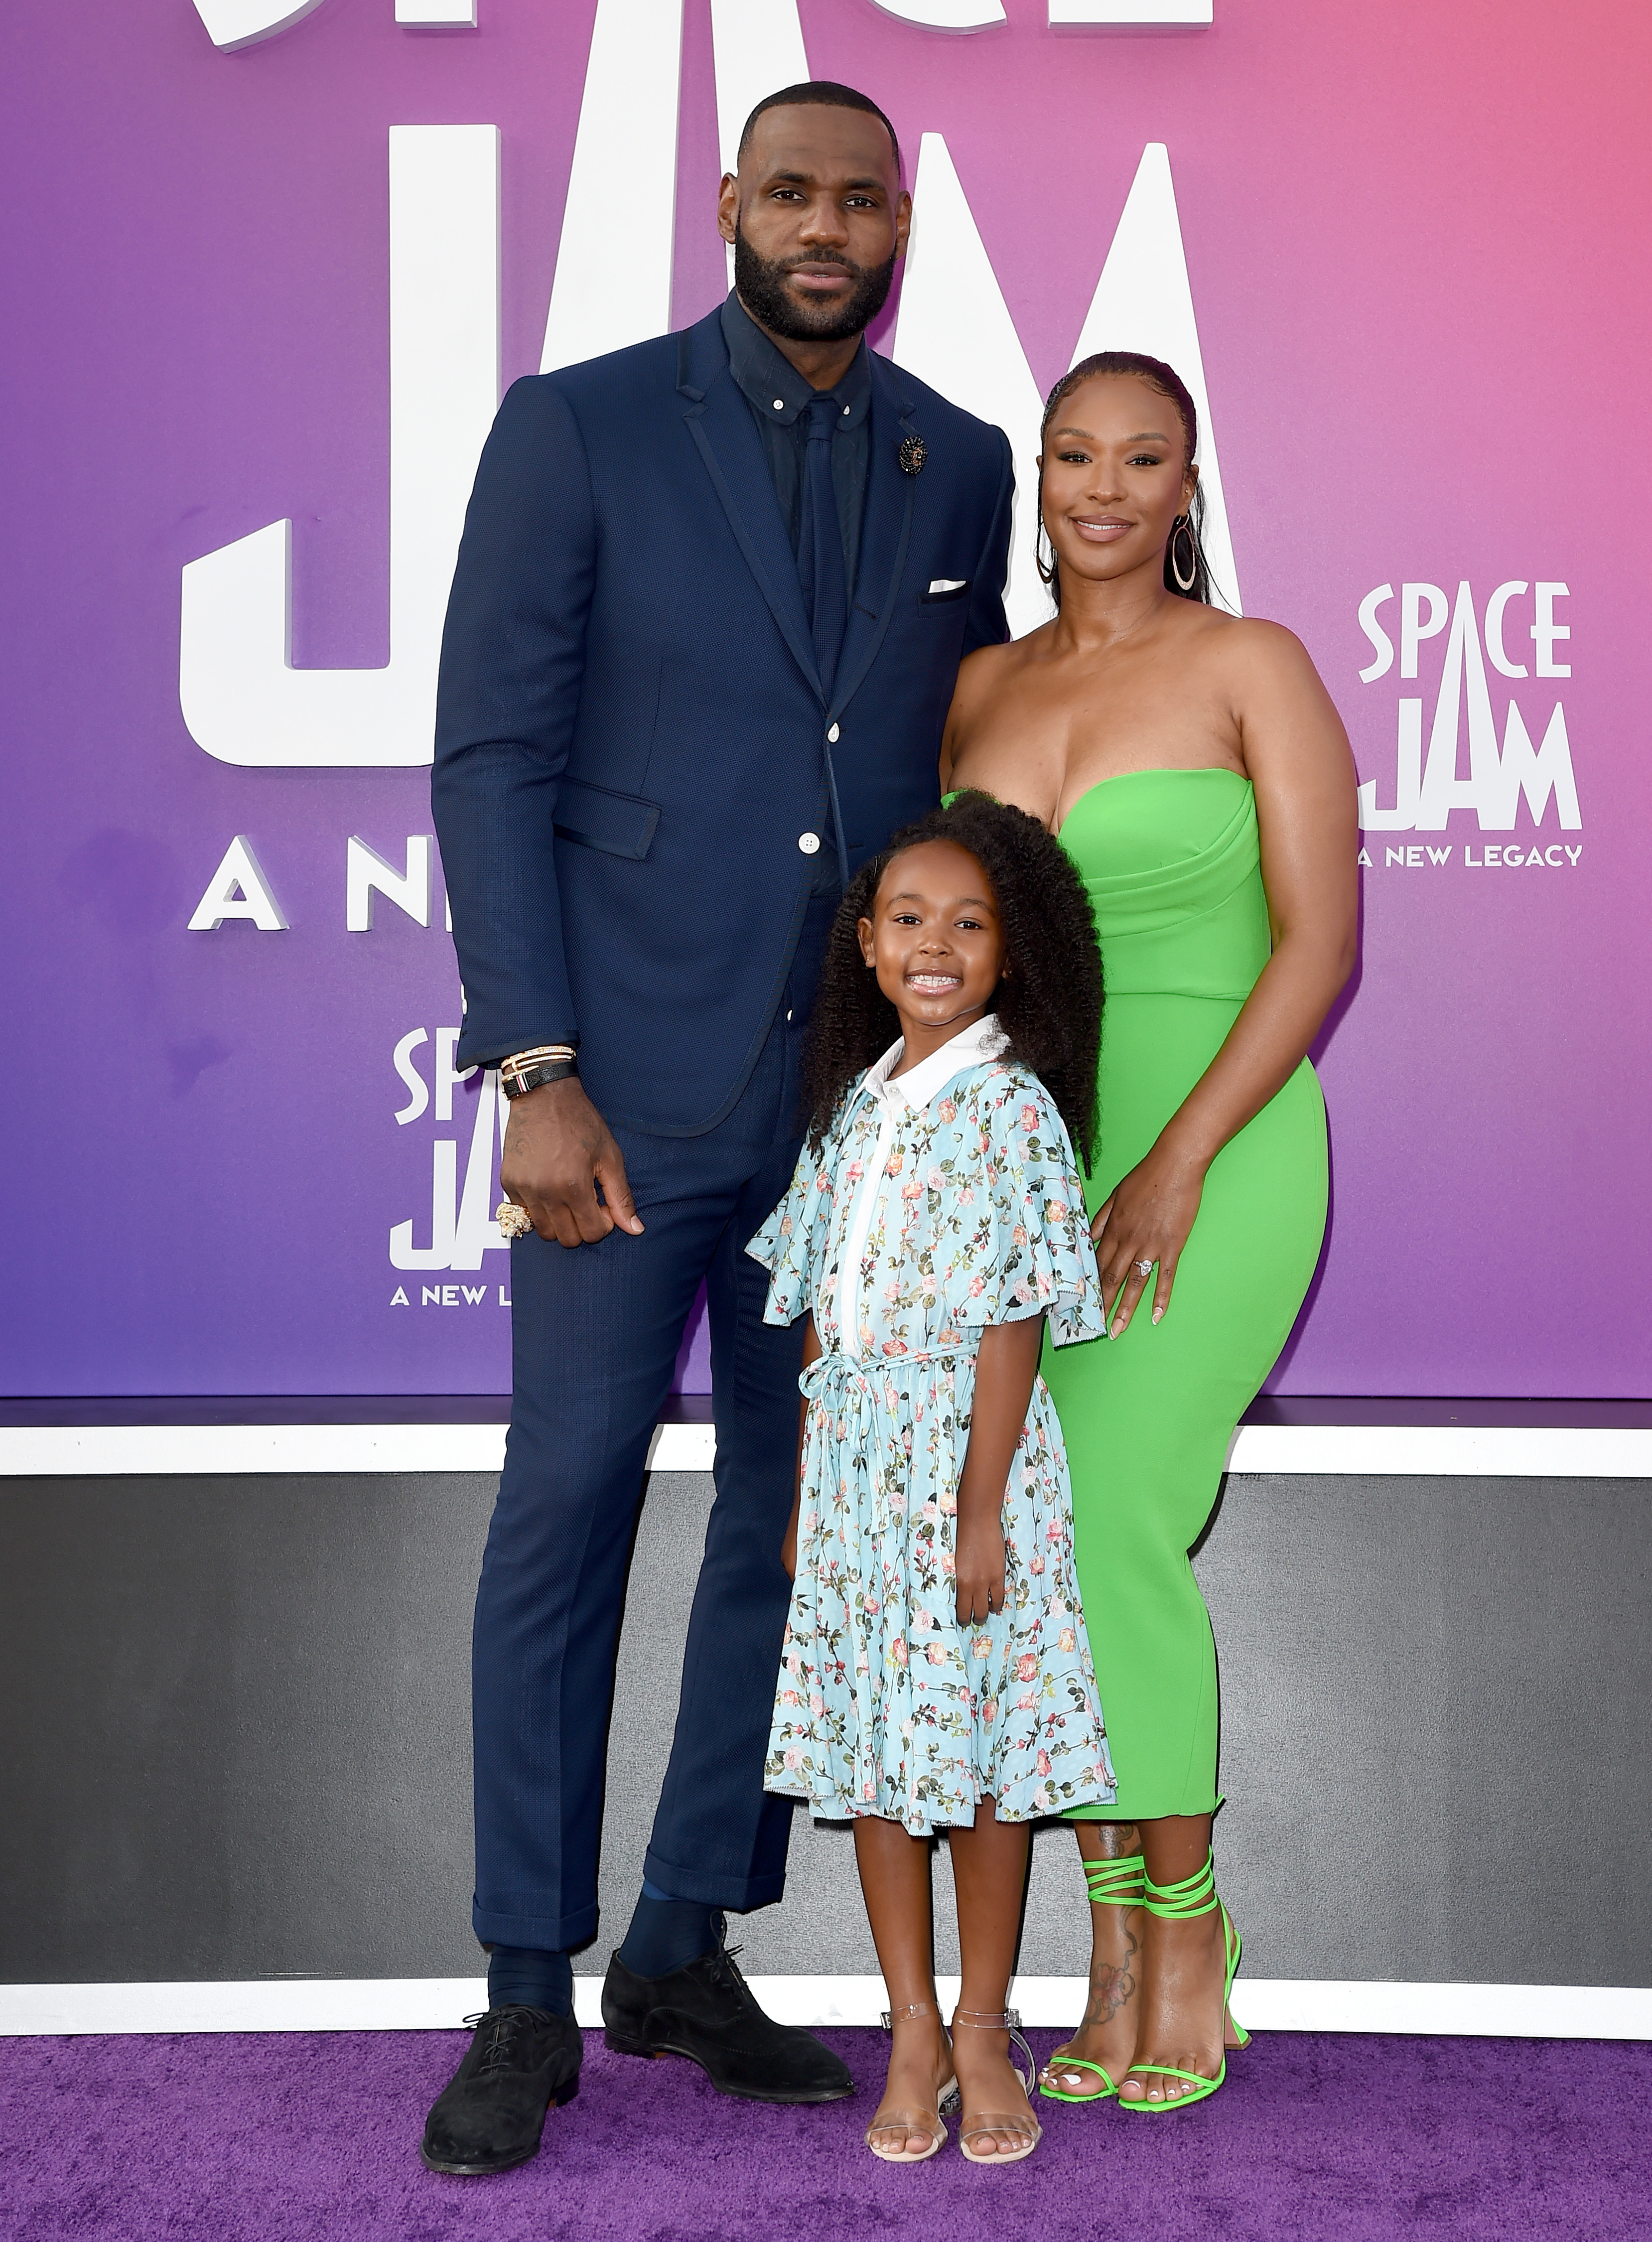 LeBron James, wife Savannah, and daughter Zhuri James attend the Premiere of Warner Bros "Space Jam: A New Legacy" at Regal LA Live on July 12, 2021, in Los Angeles, California | Source: Getty Images